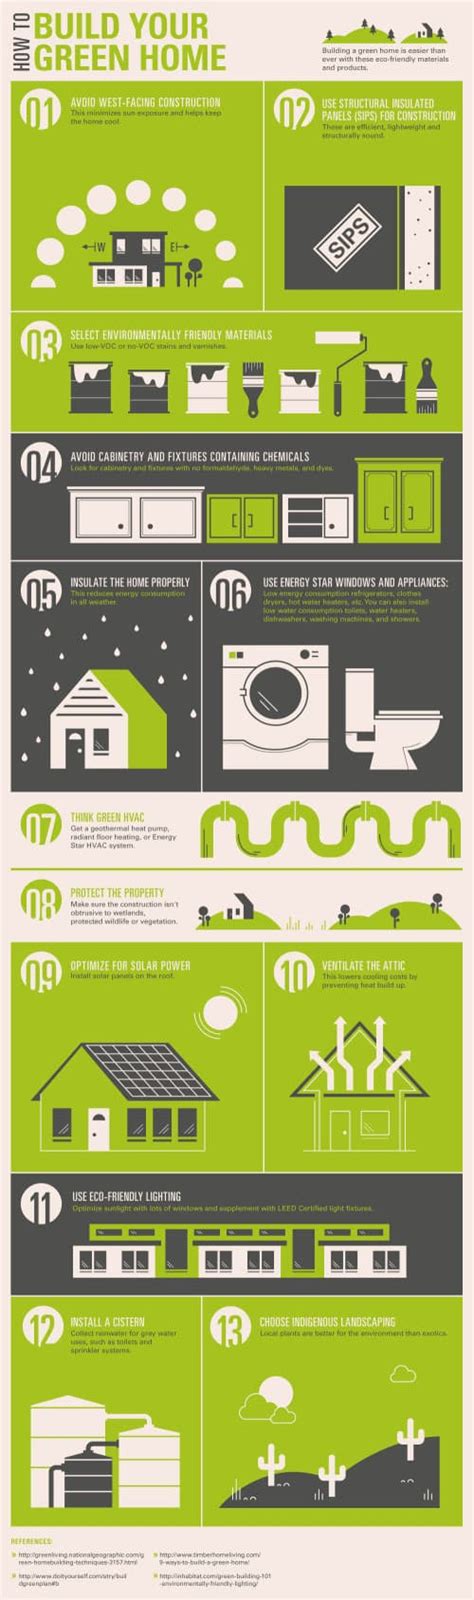 13 Tips For Building A Green Home Infographic Green Home Gnome